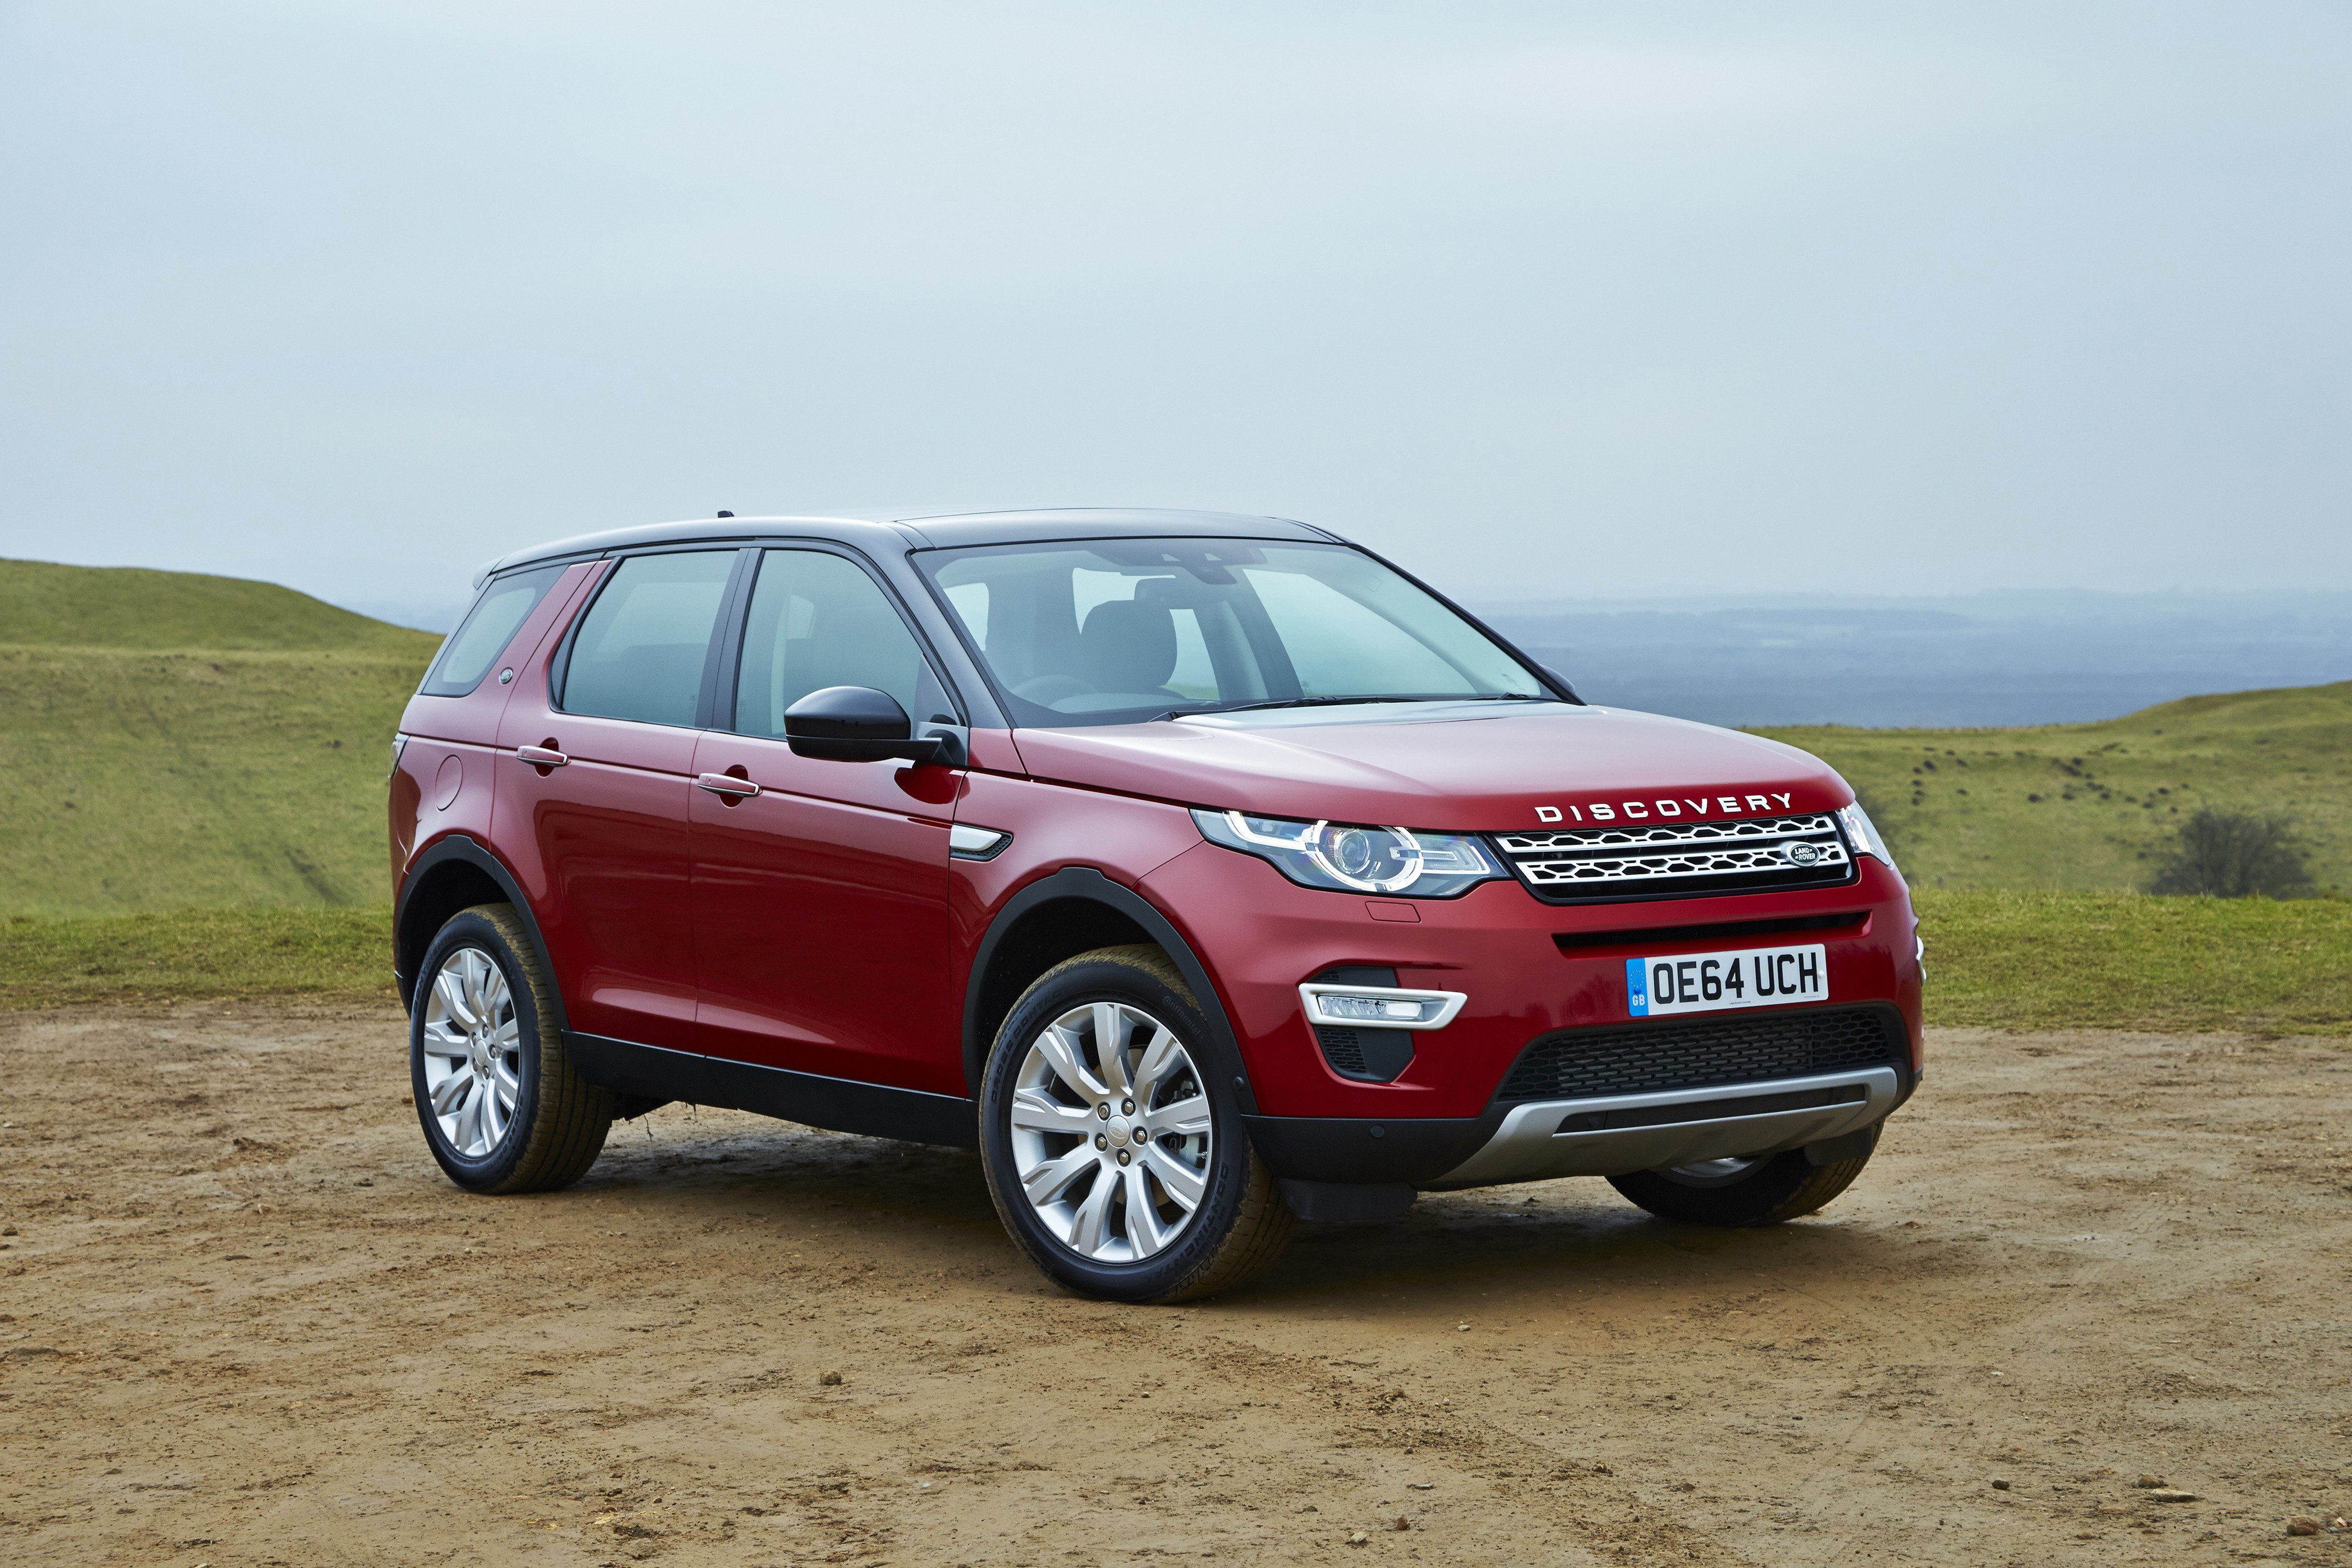 Land Rover Discovery Sport 2014 2015 2016 Autoevolution